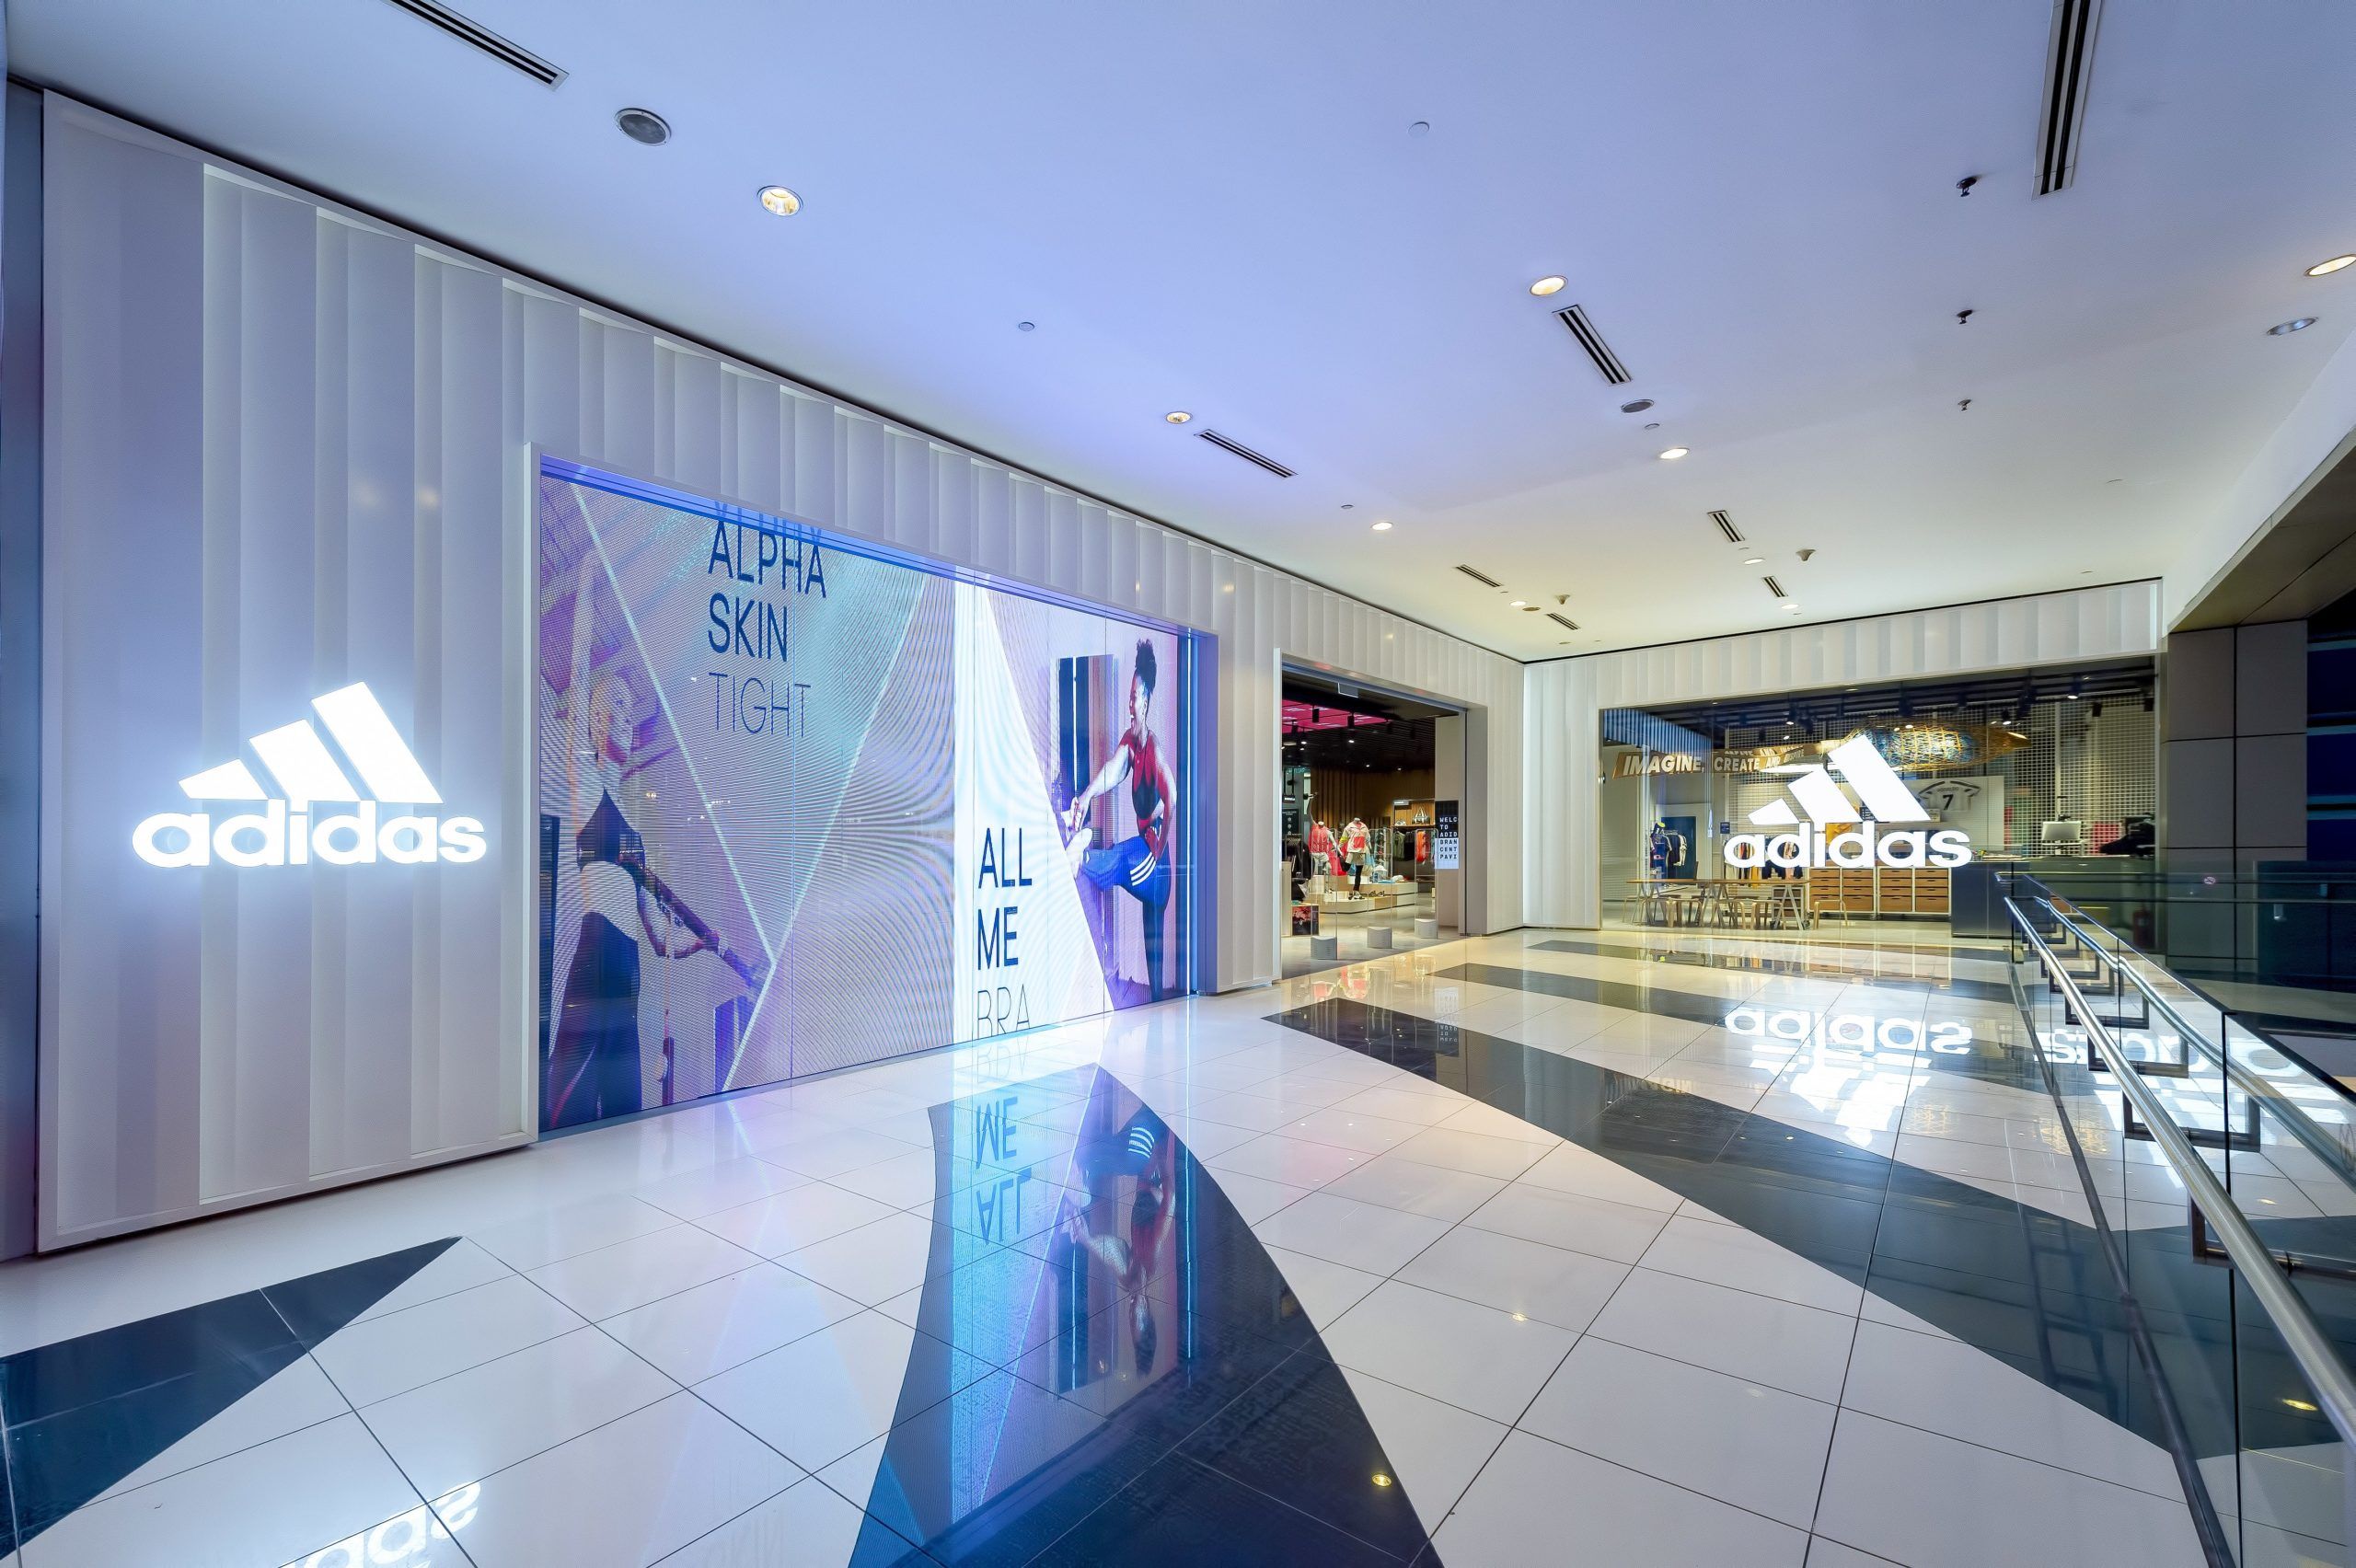 Adidas unveils its all-new in Pavilion KL